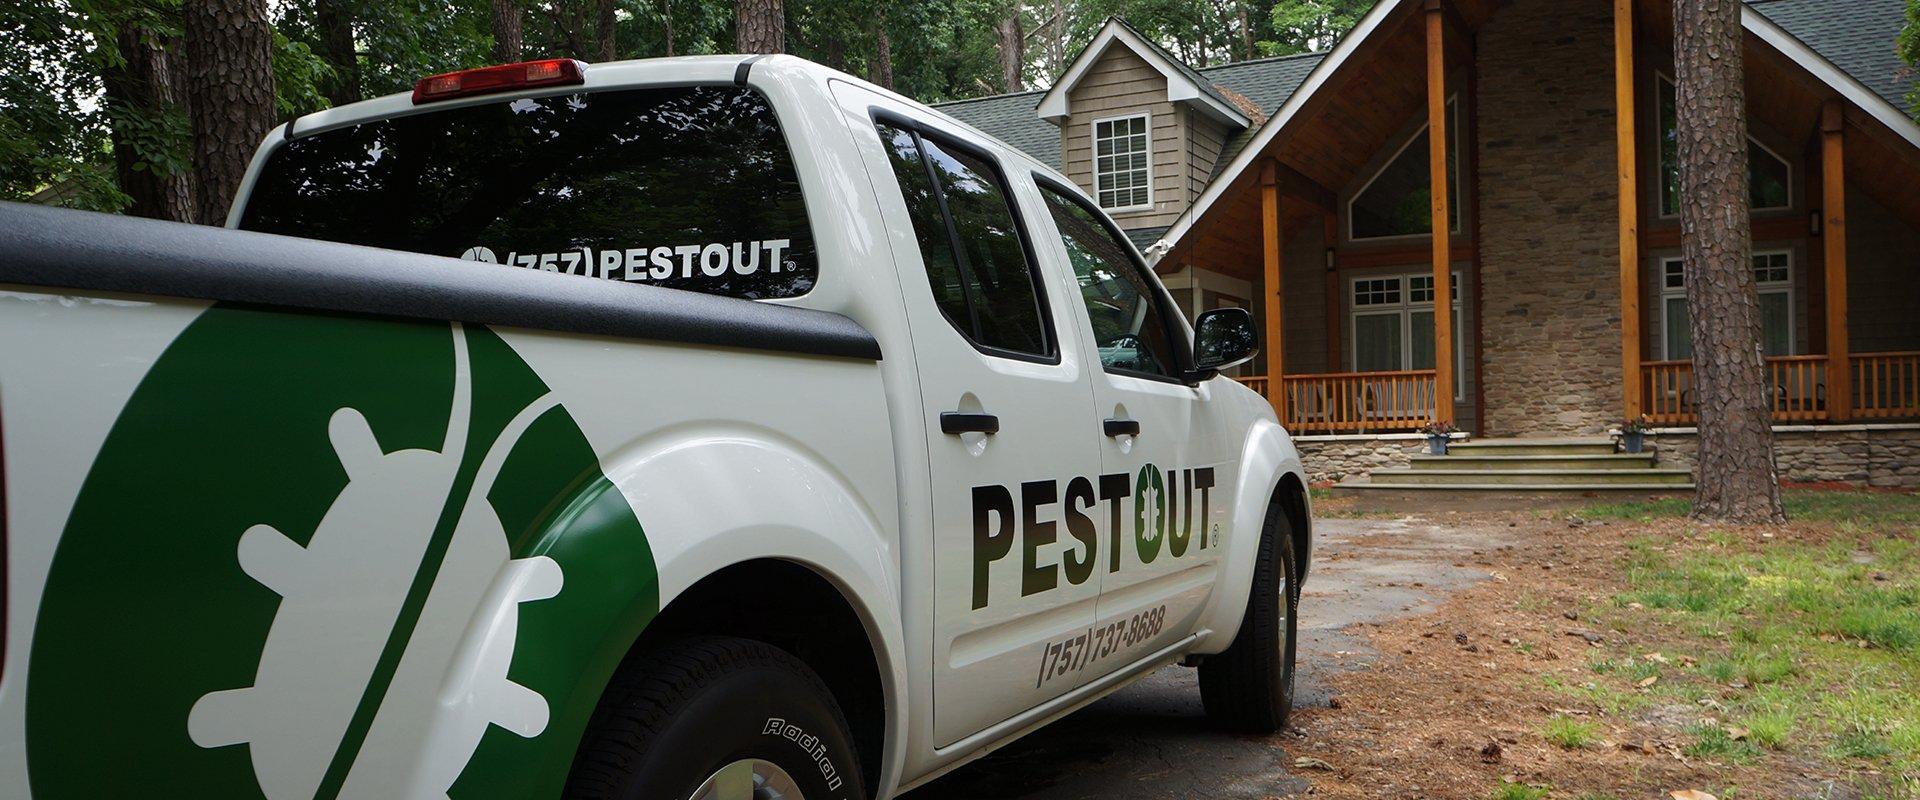 a PESTOUT truck parked in front of a home